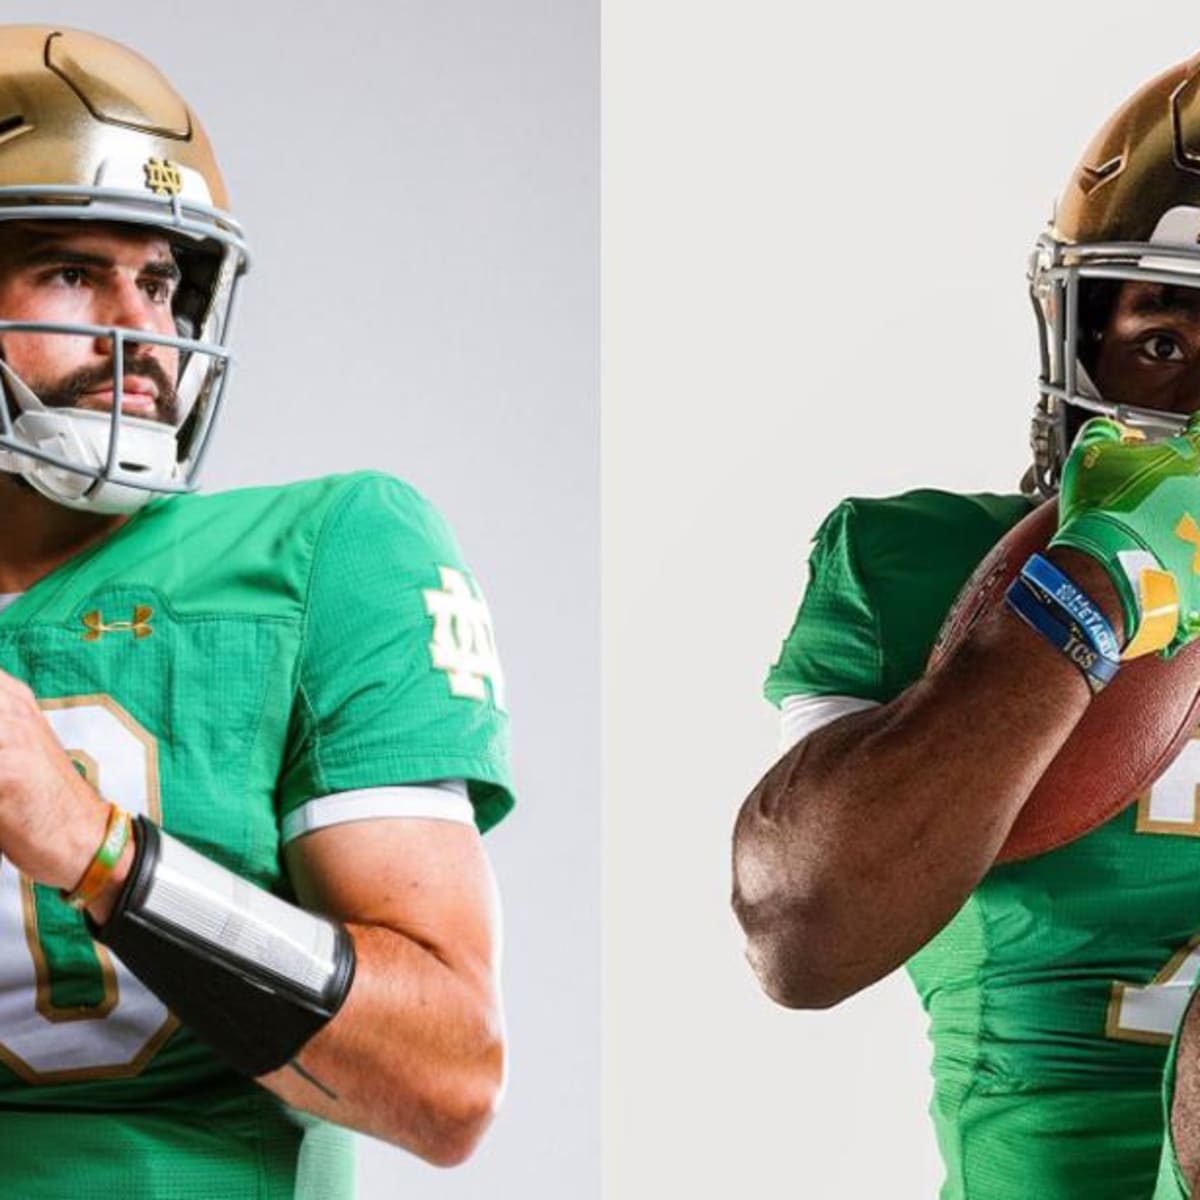 Notre Dame Football: Are the Green Jerseys Cursed for the Irish